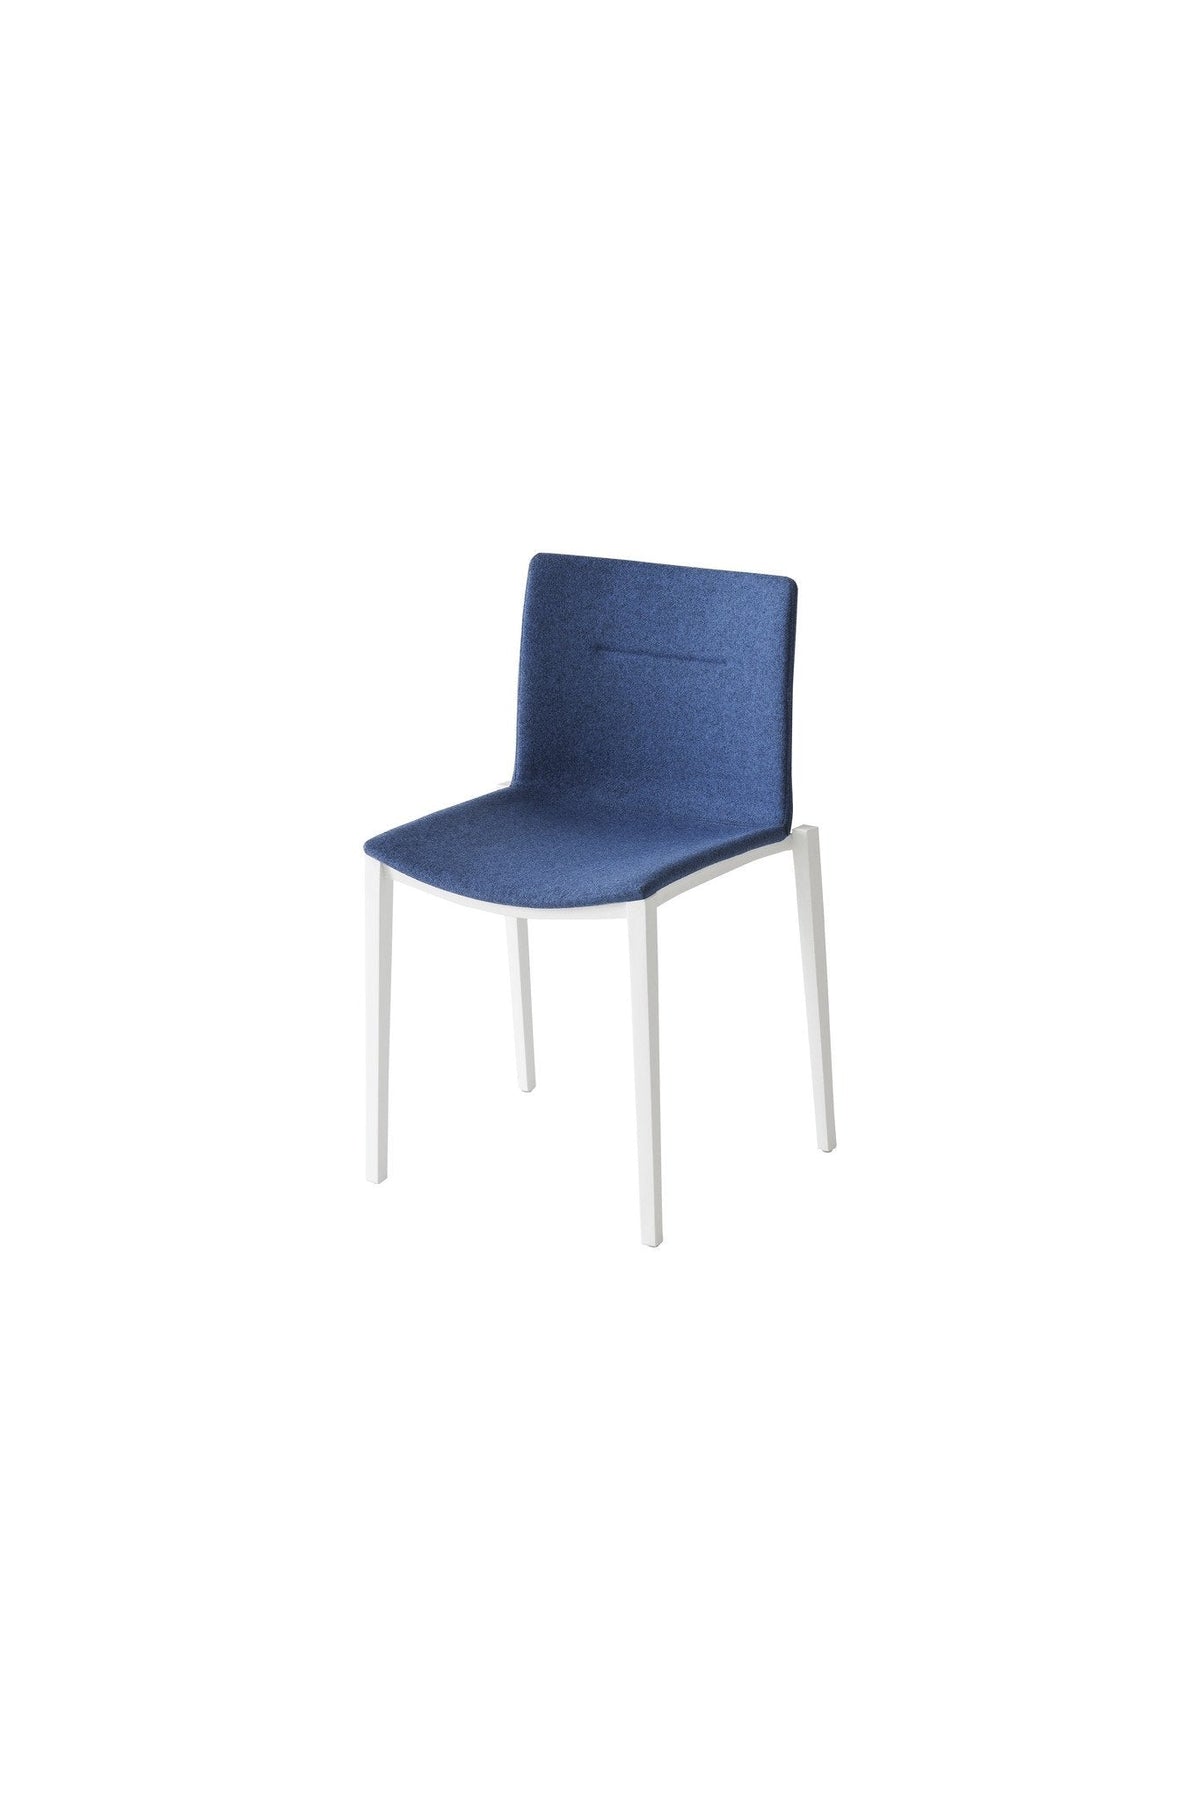 Clipperton Dress Side Chair-Gaber-Contract Furniture Store